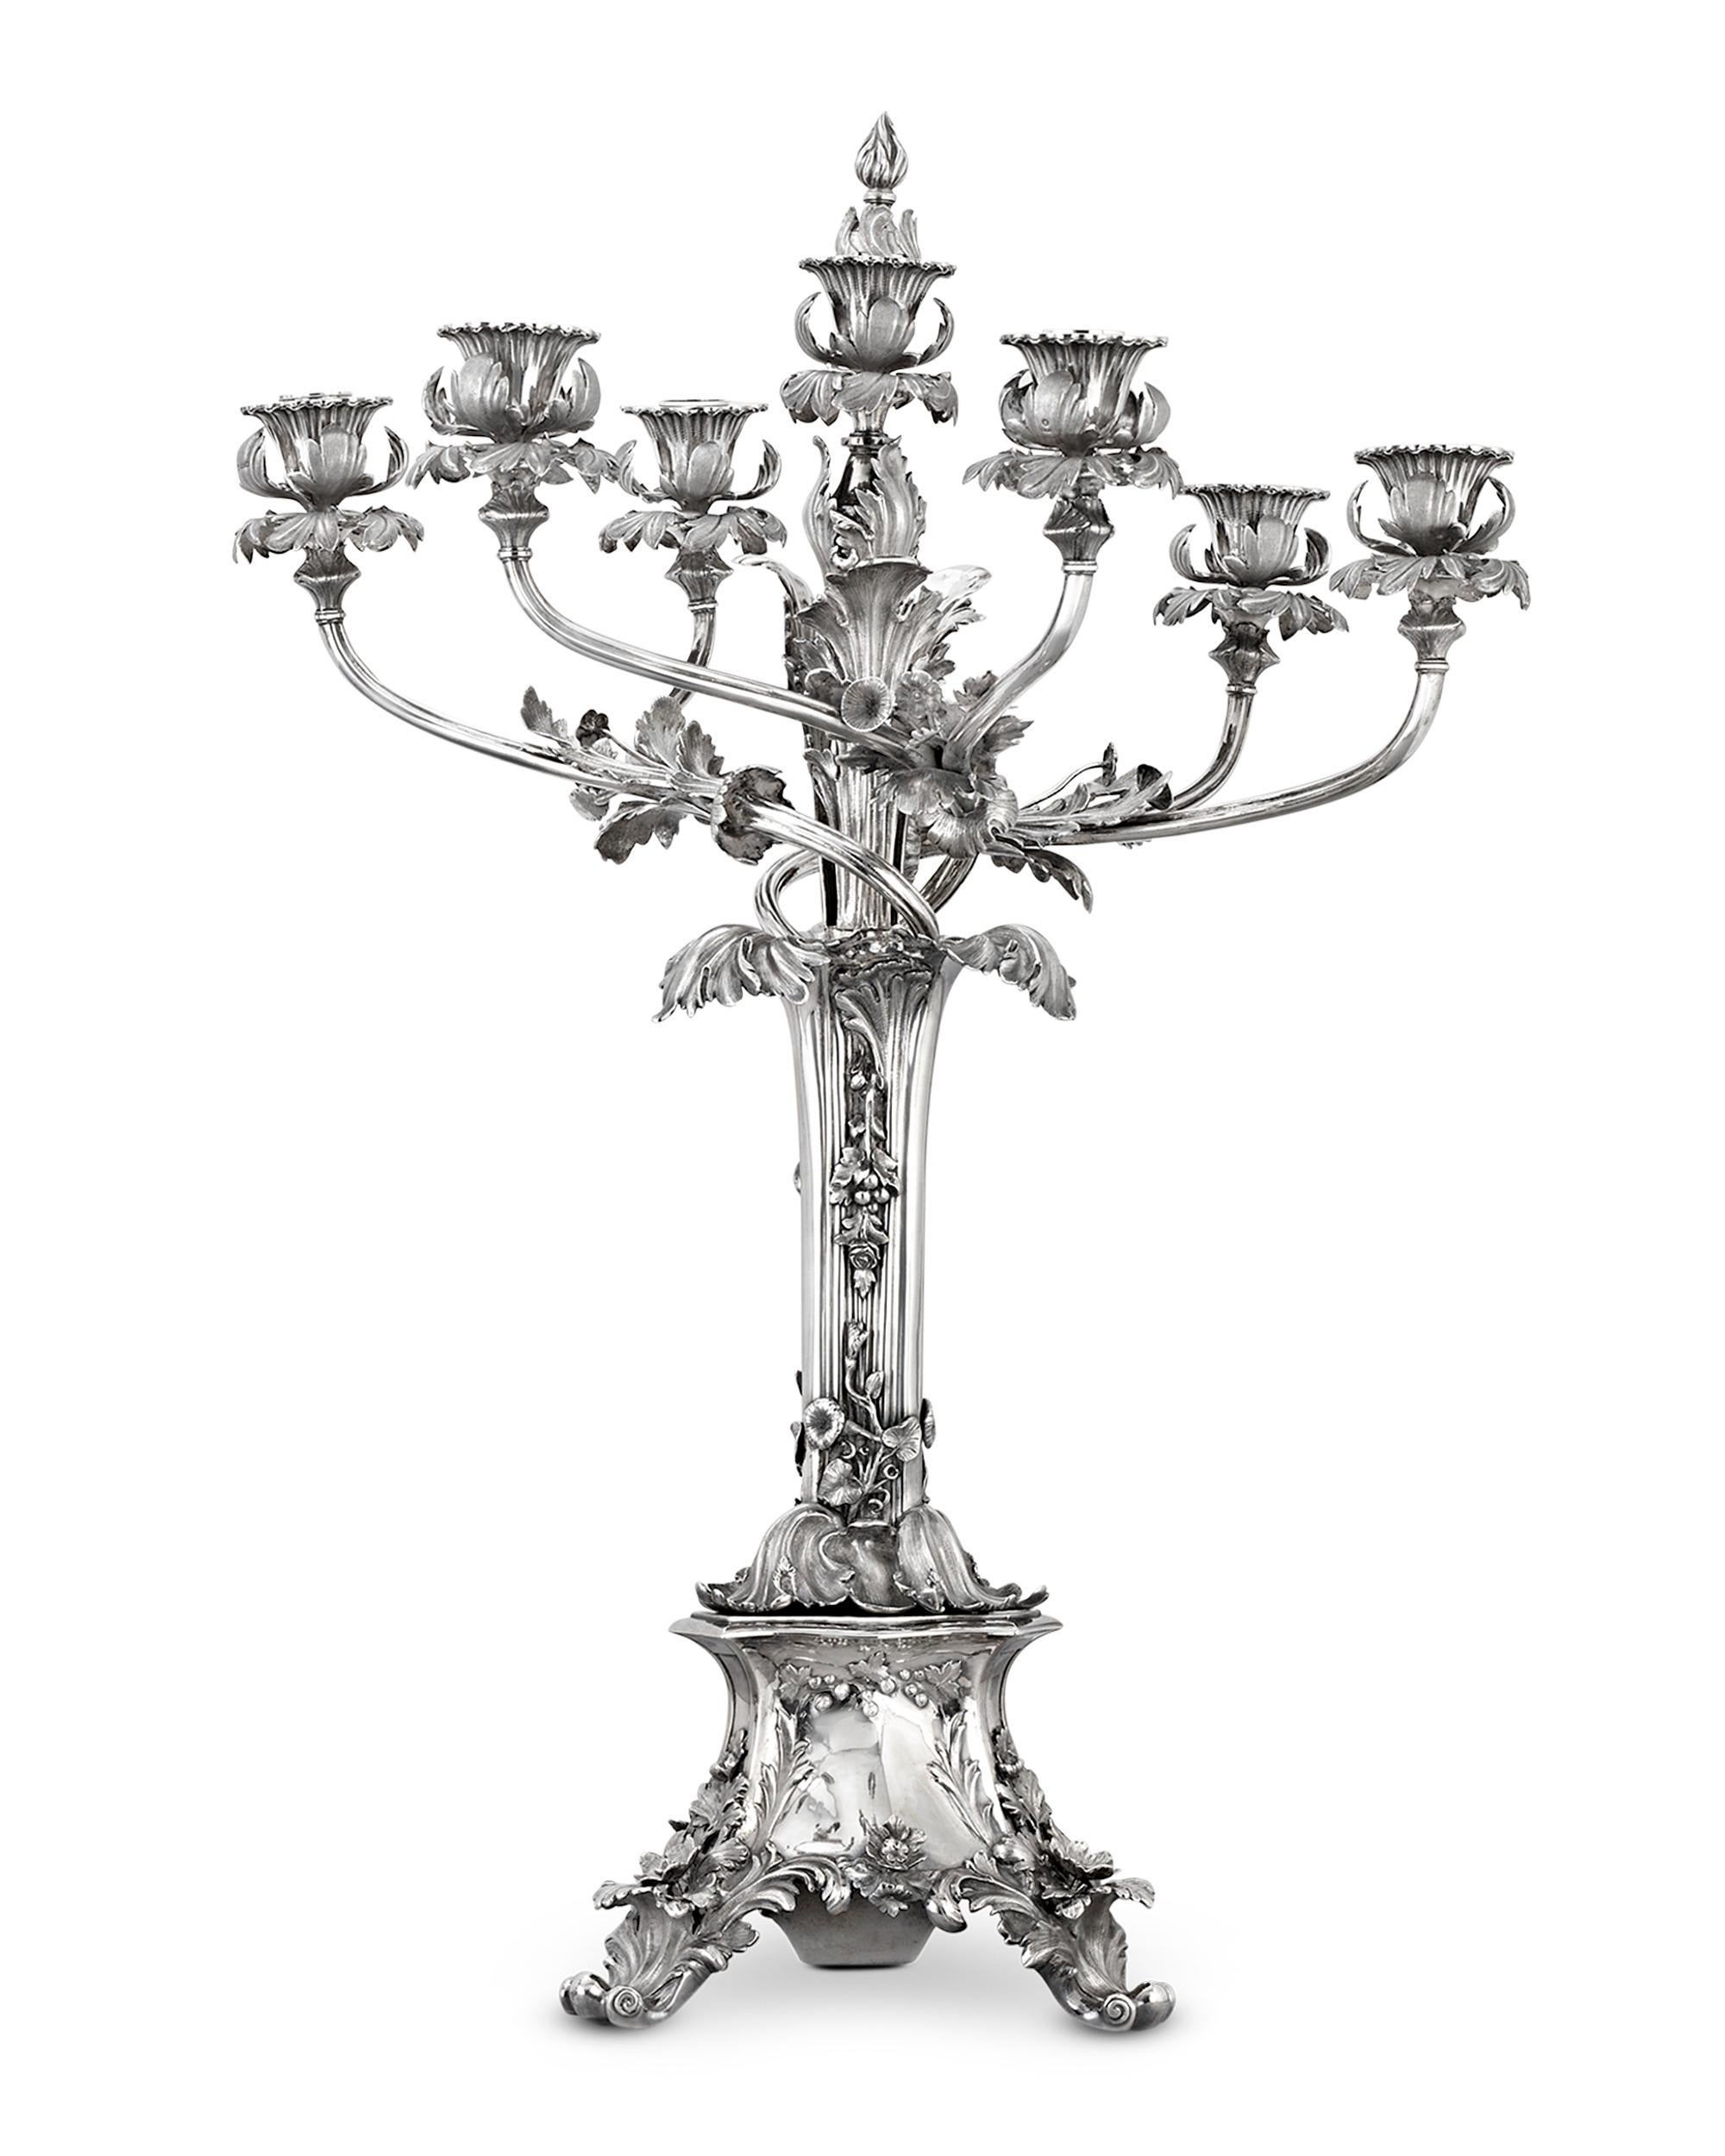 19th Century Pair of Silver Neoclassical Candelabra by Robinson, Edkins & Aston